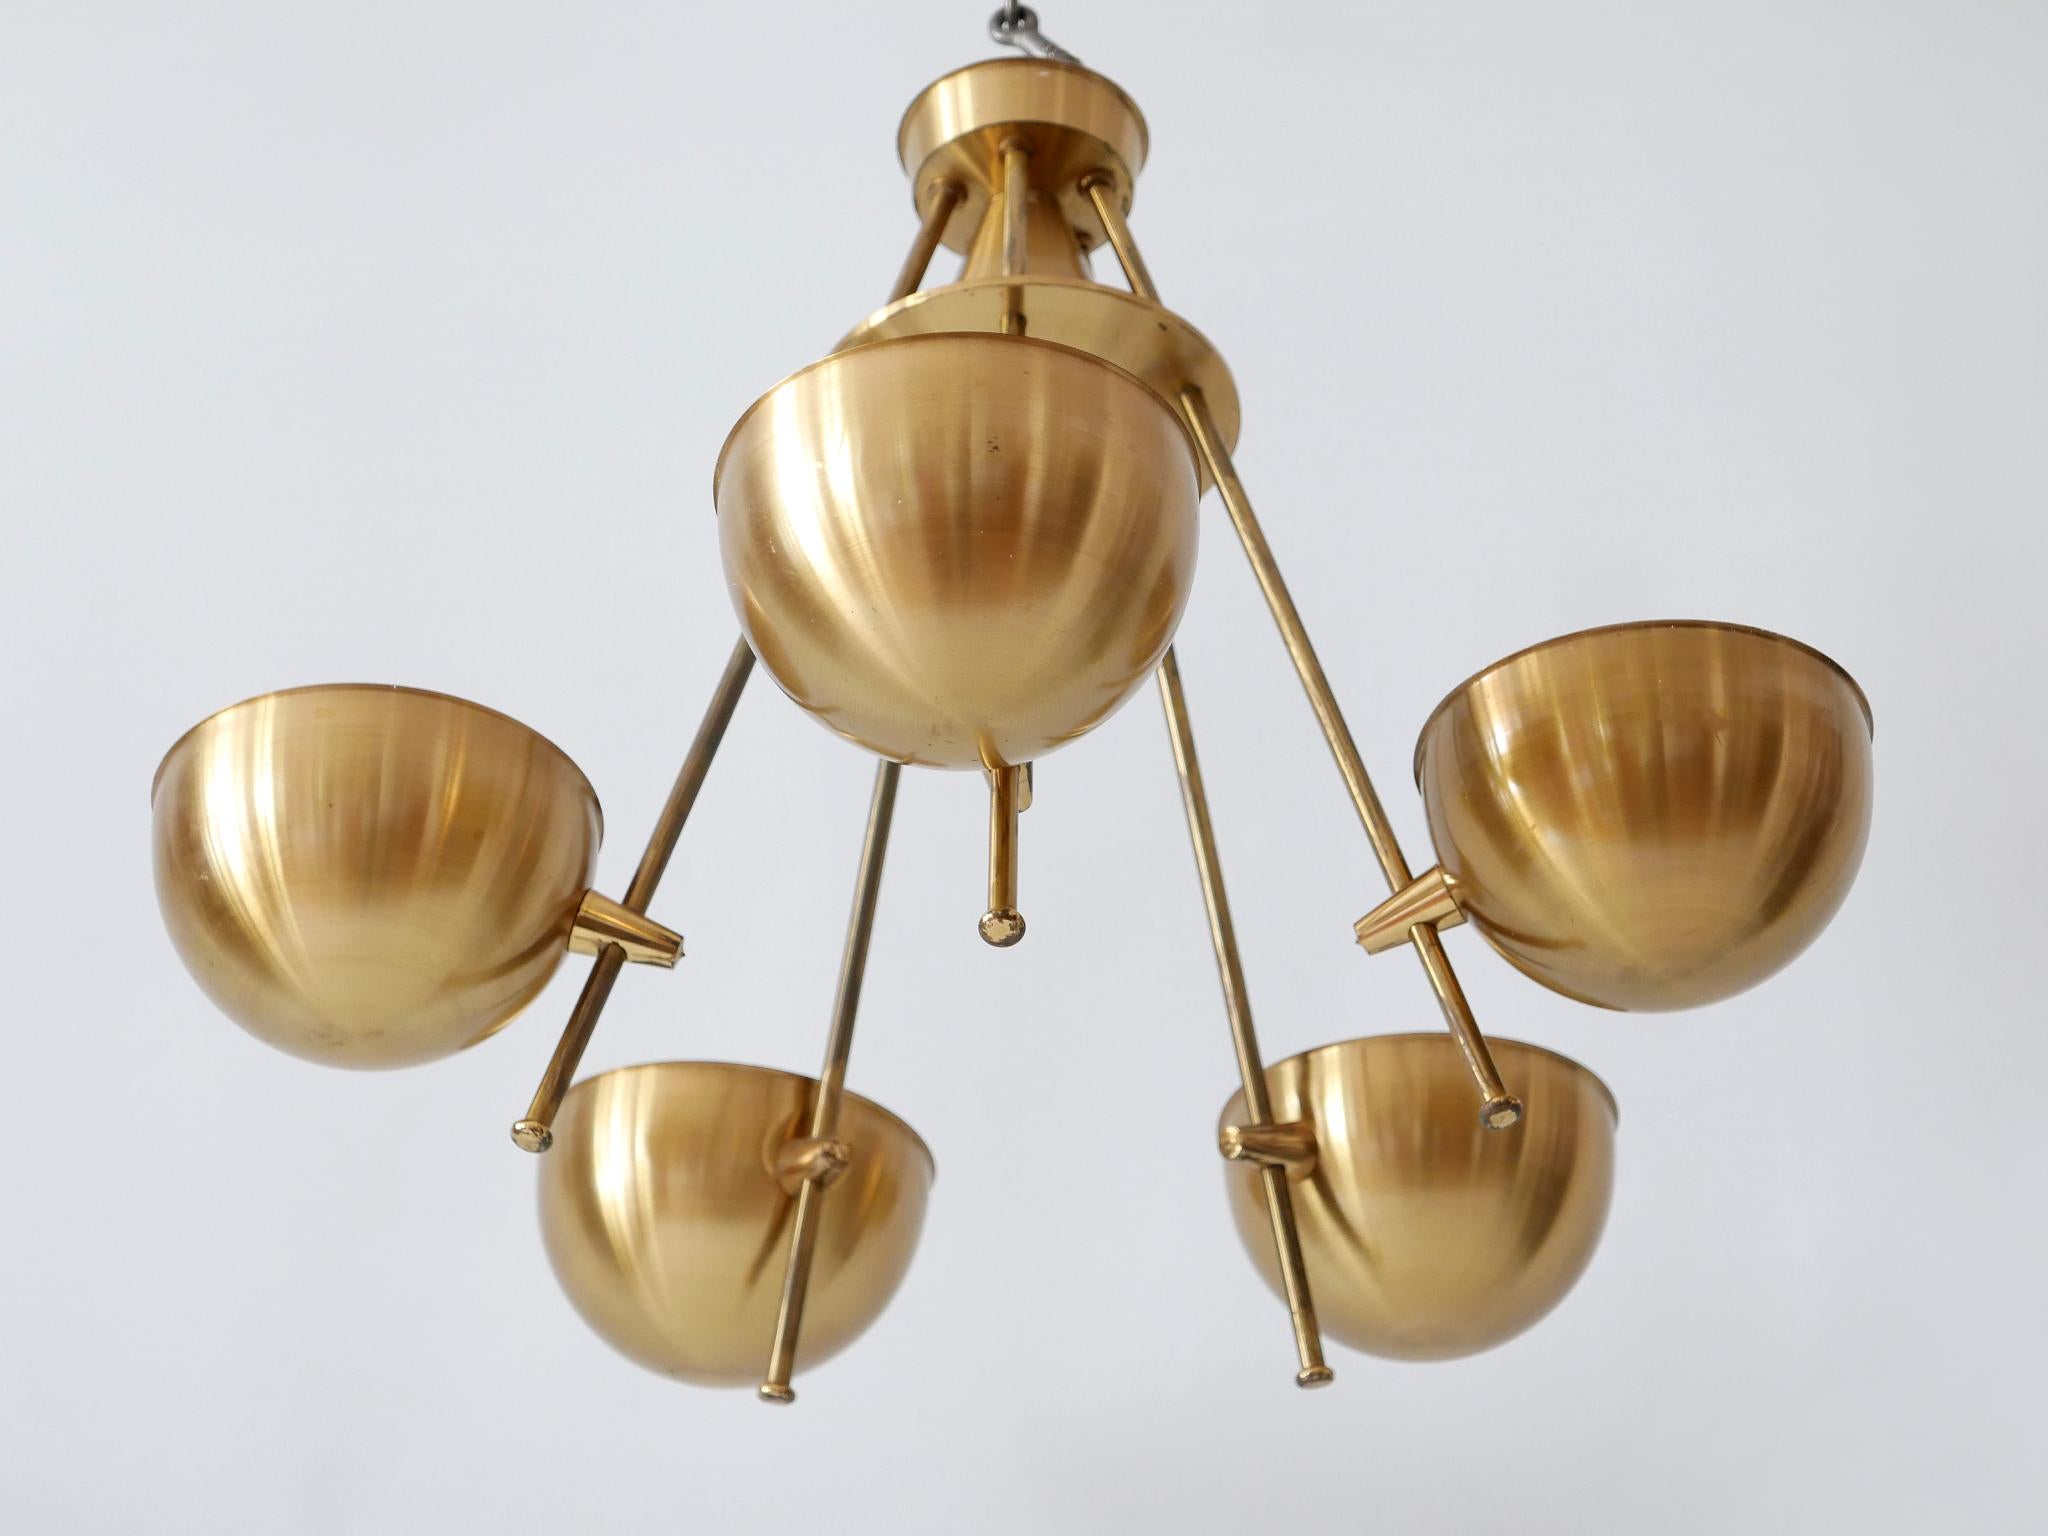 Exceptional Mid-Century Five-Flamed Chandelier or Pendant Lamp Sweden 1950s For Sale 5